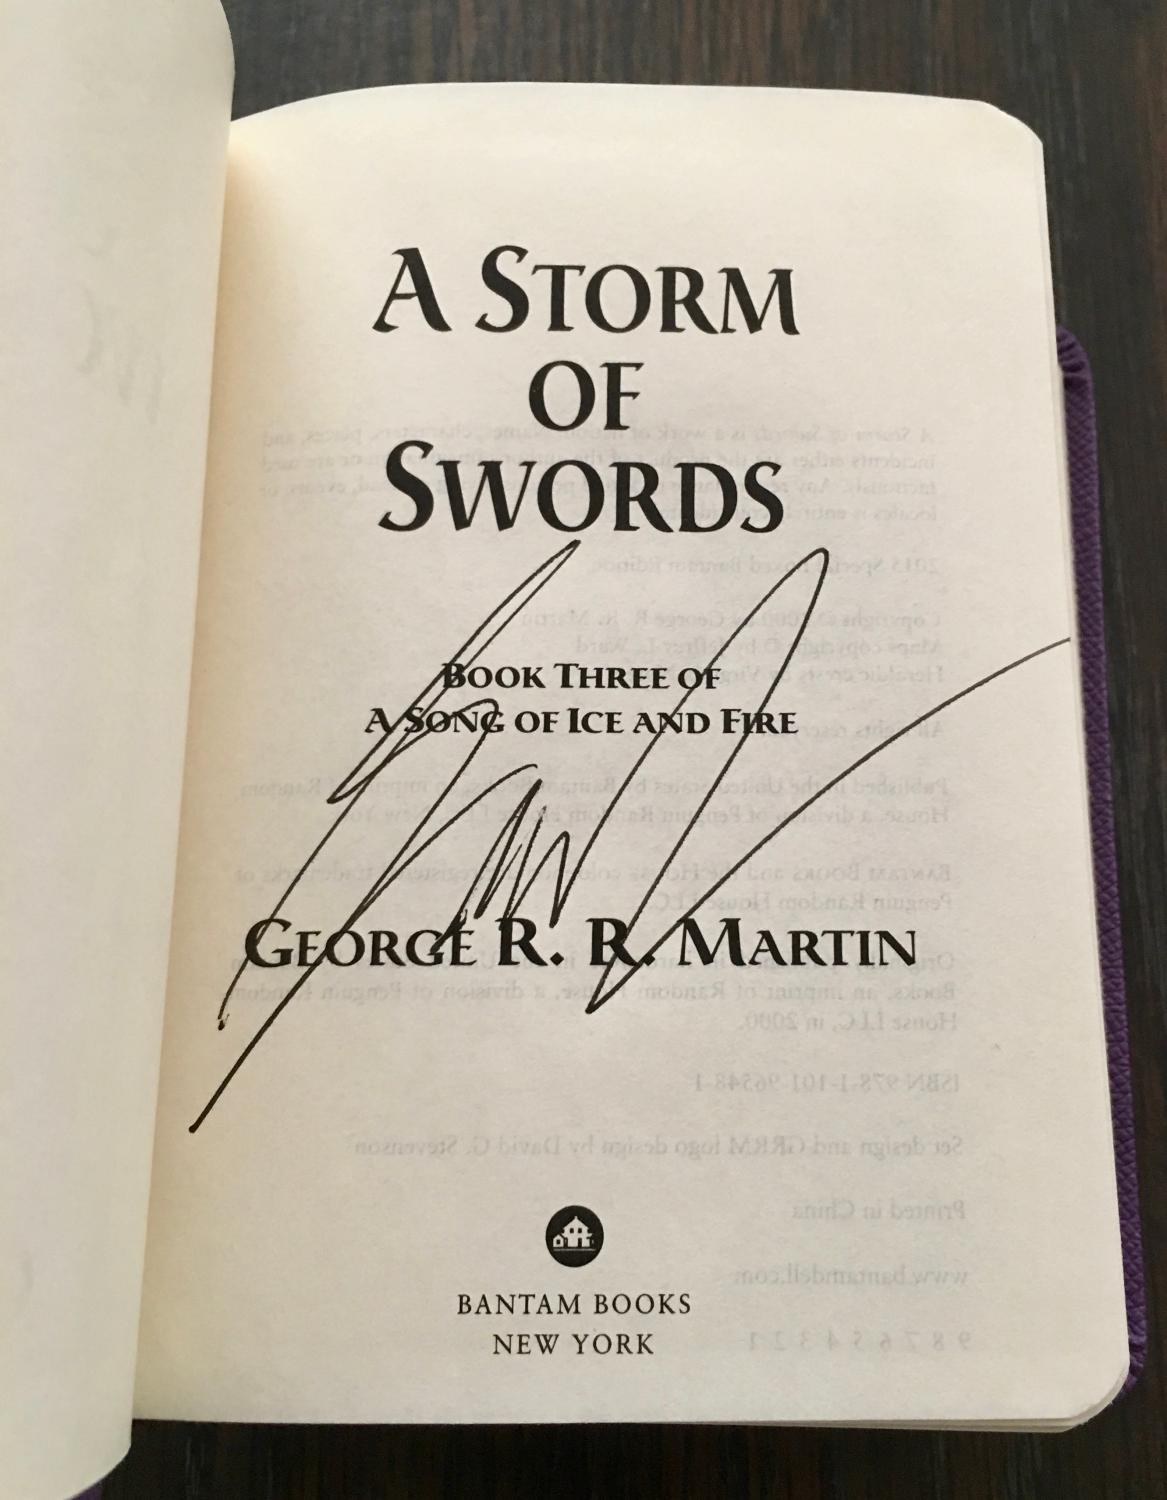 Game of Thrones Author George R R Martin Didnt Want